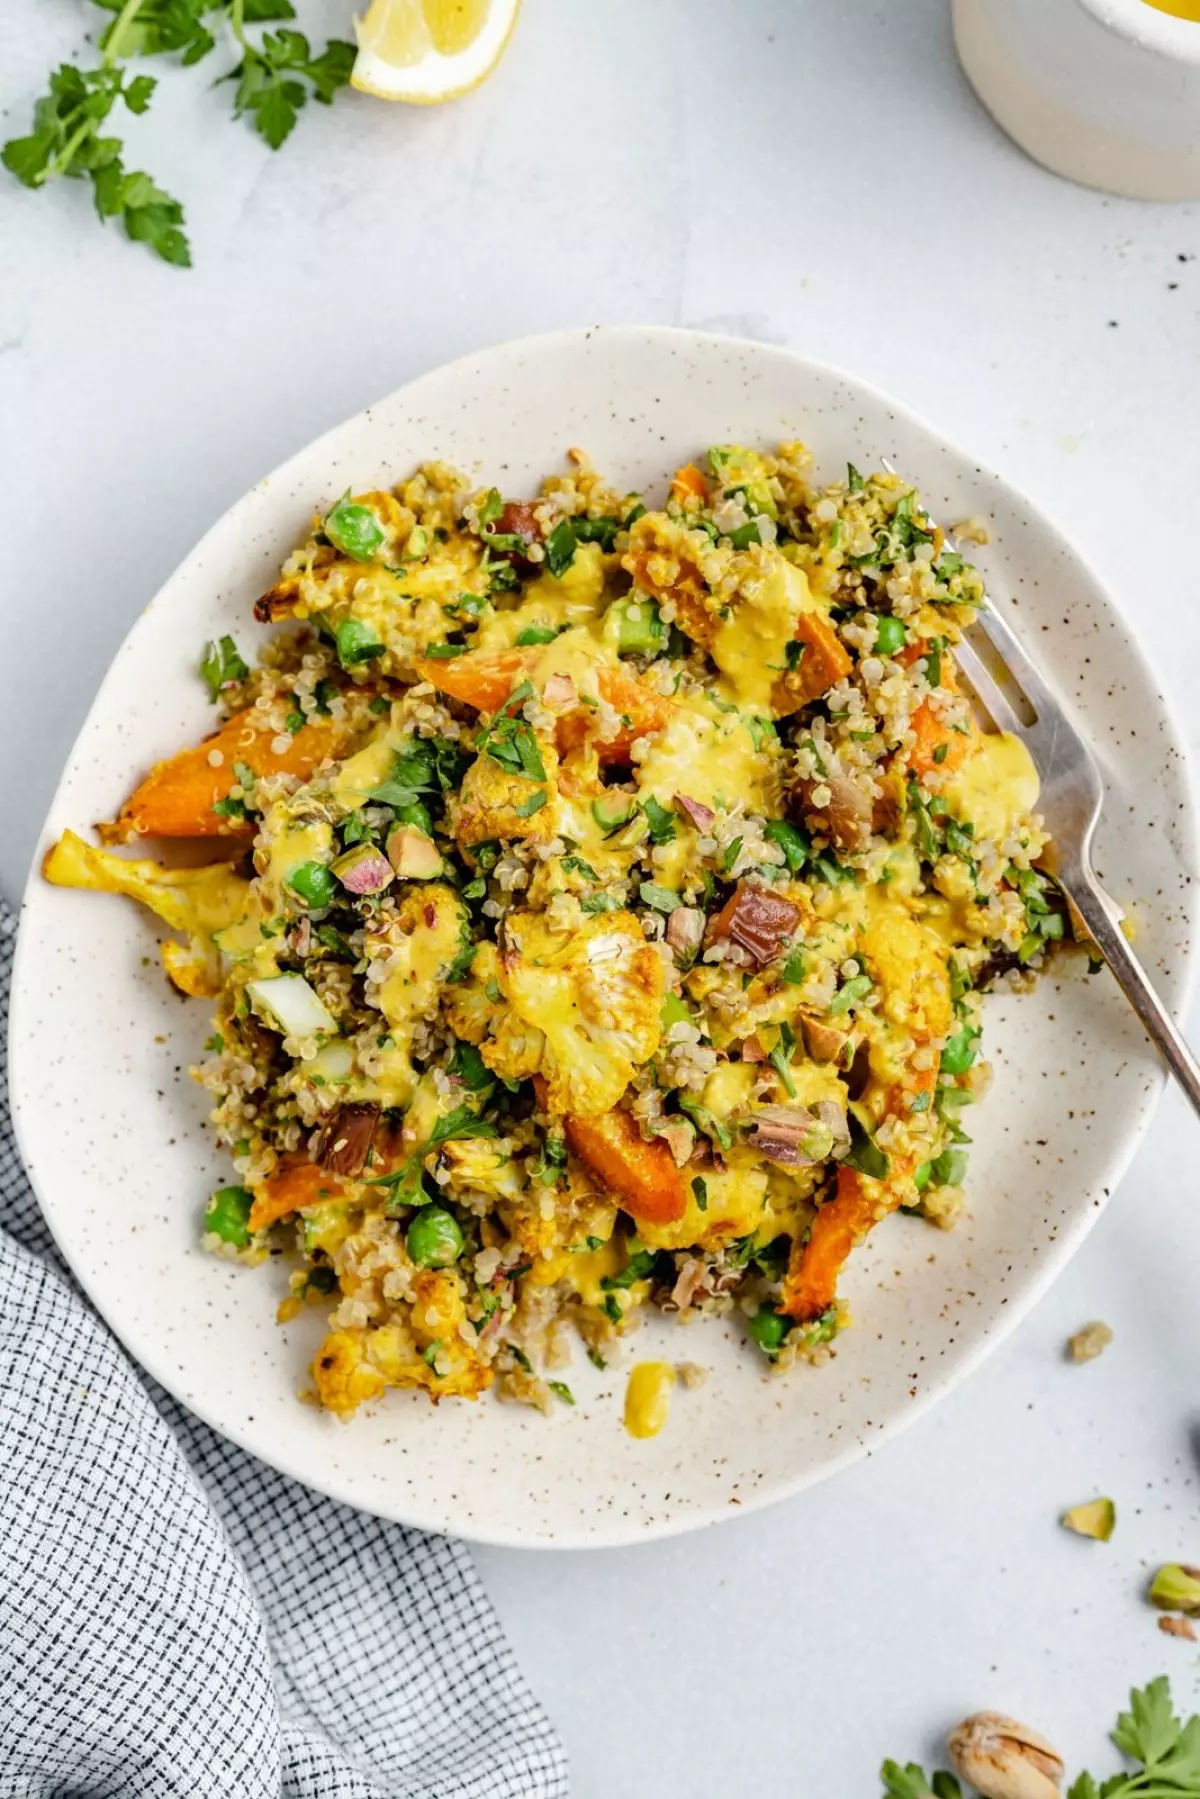 Picture of a cauliflower quinoa salad on a plate